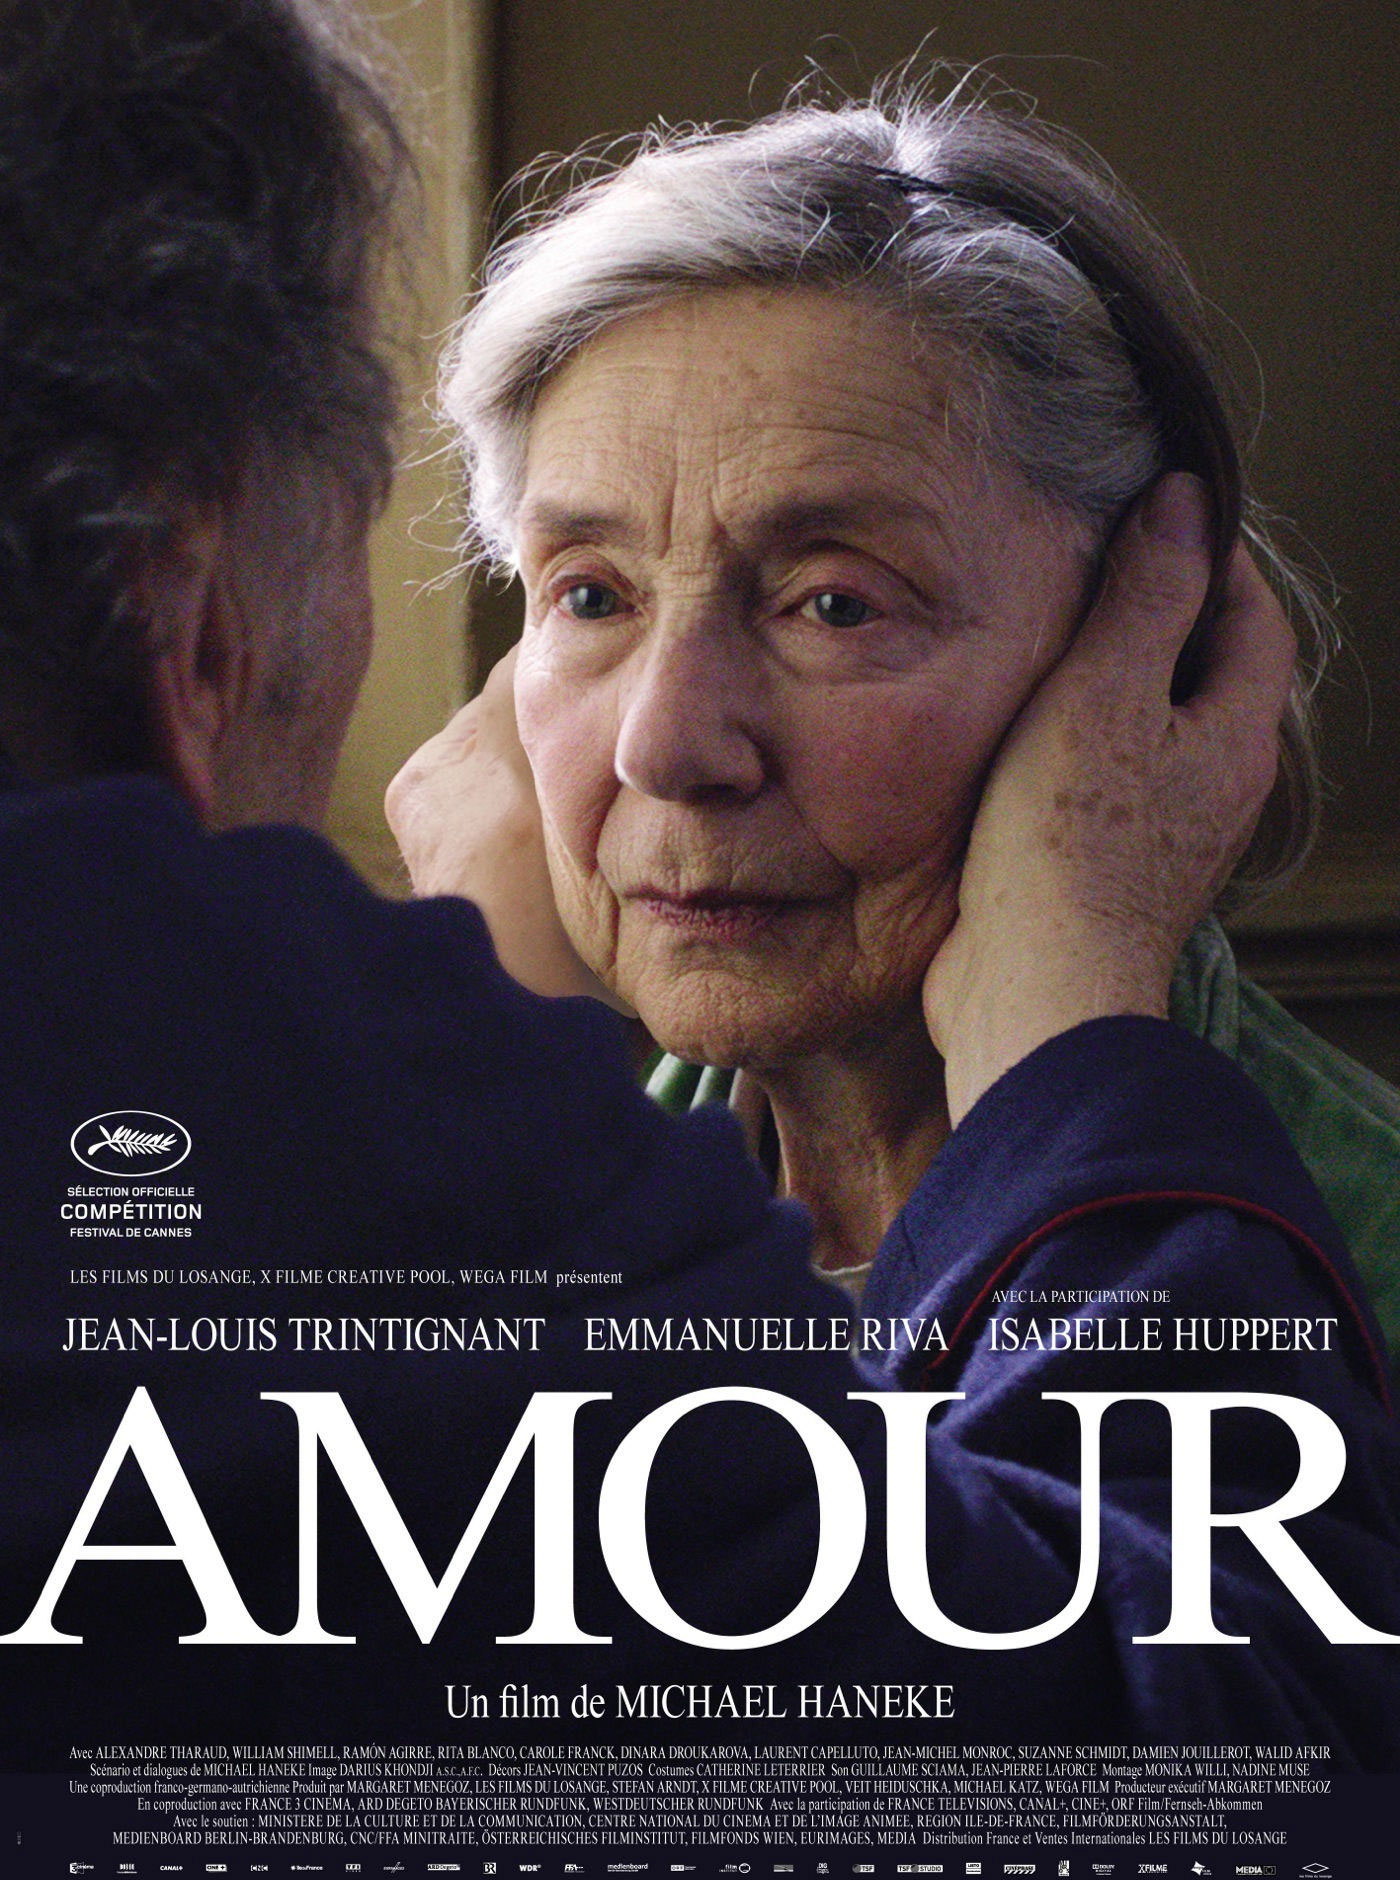 Amour Bande annonce en streaming